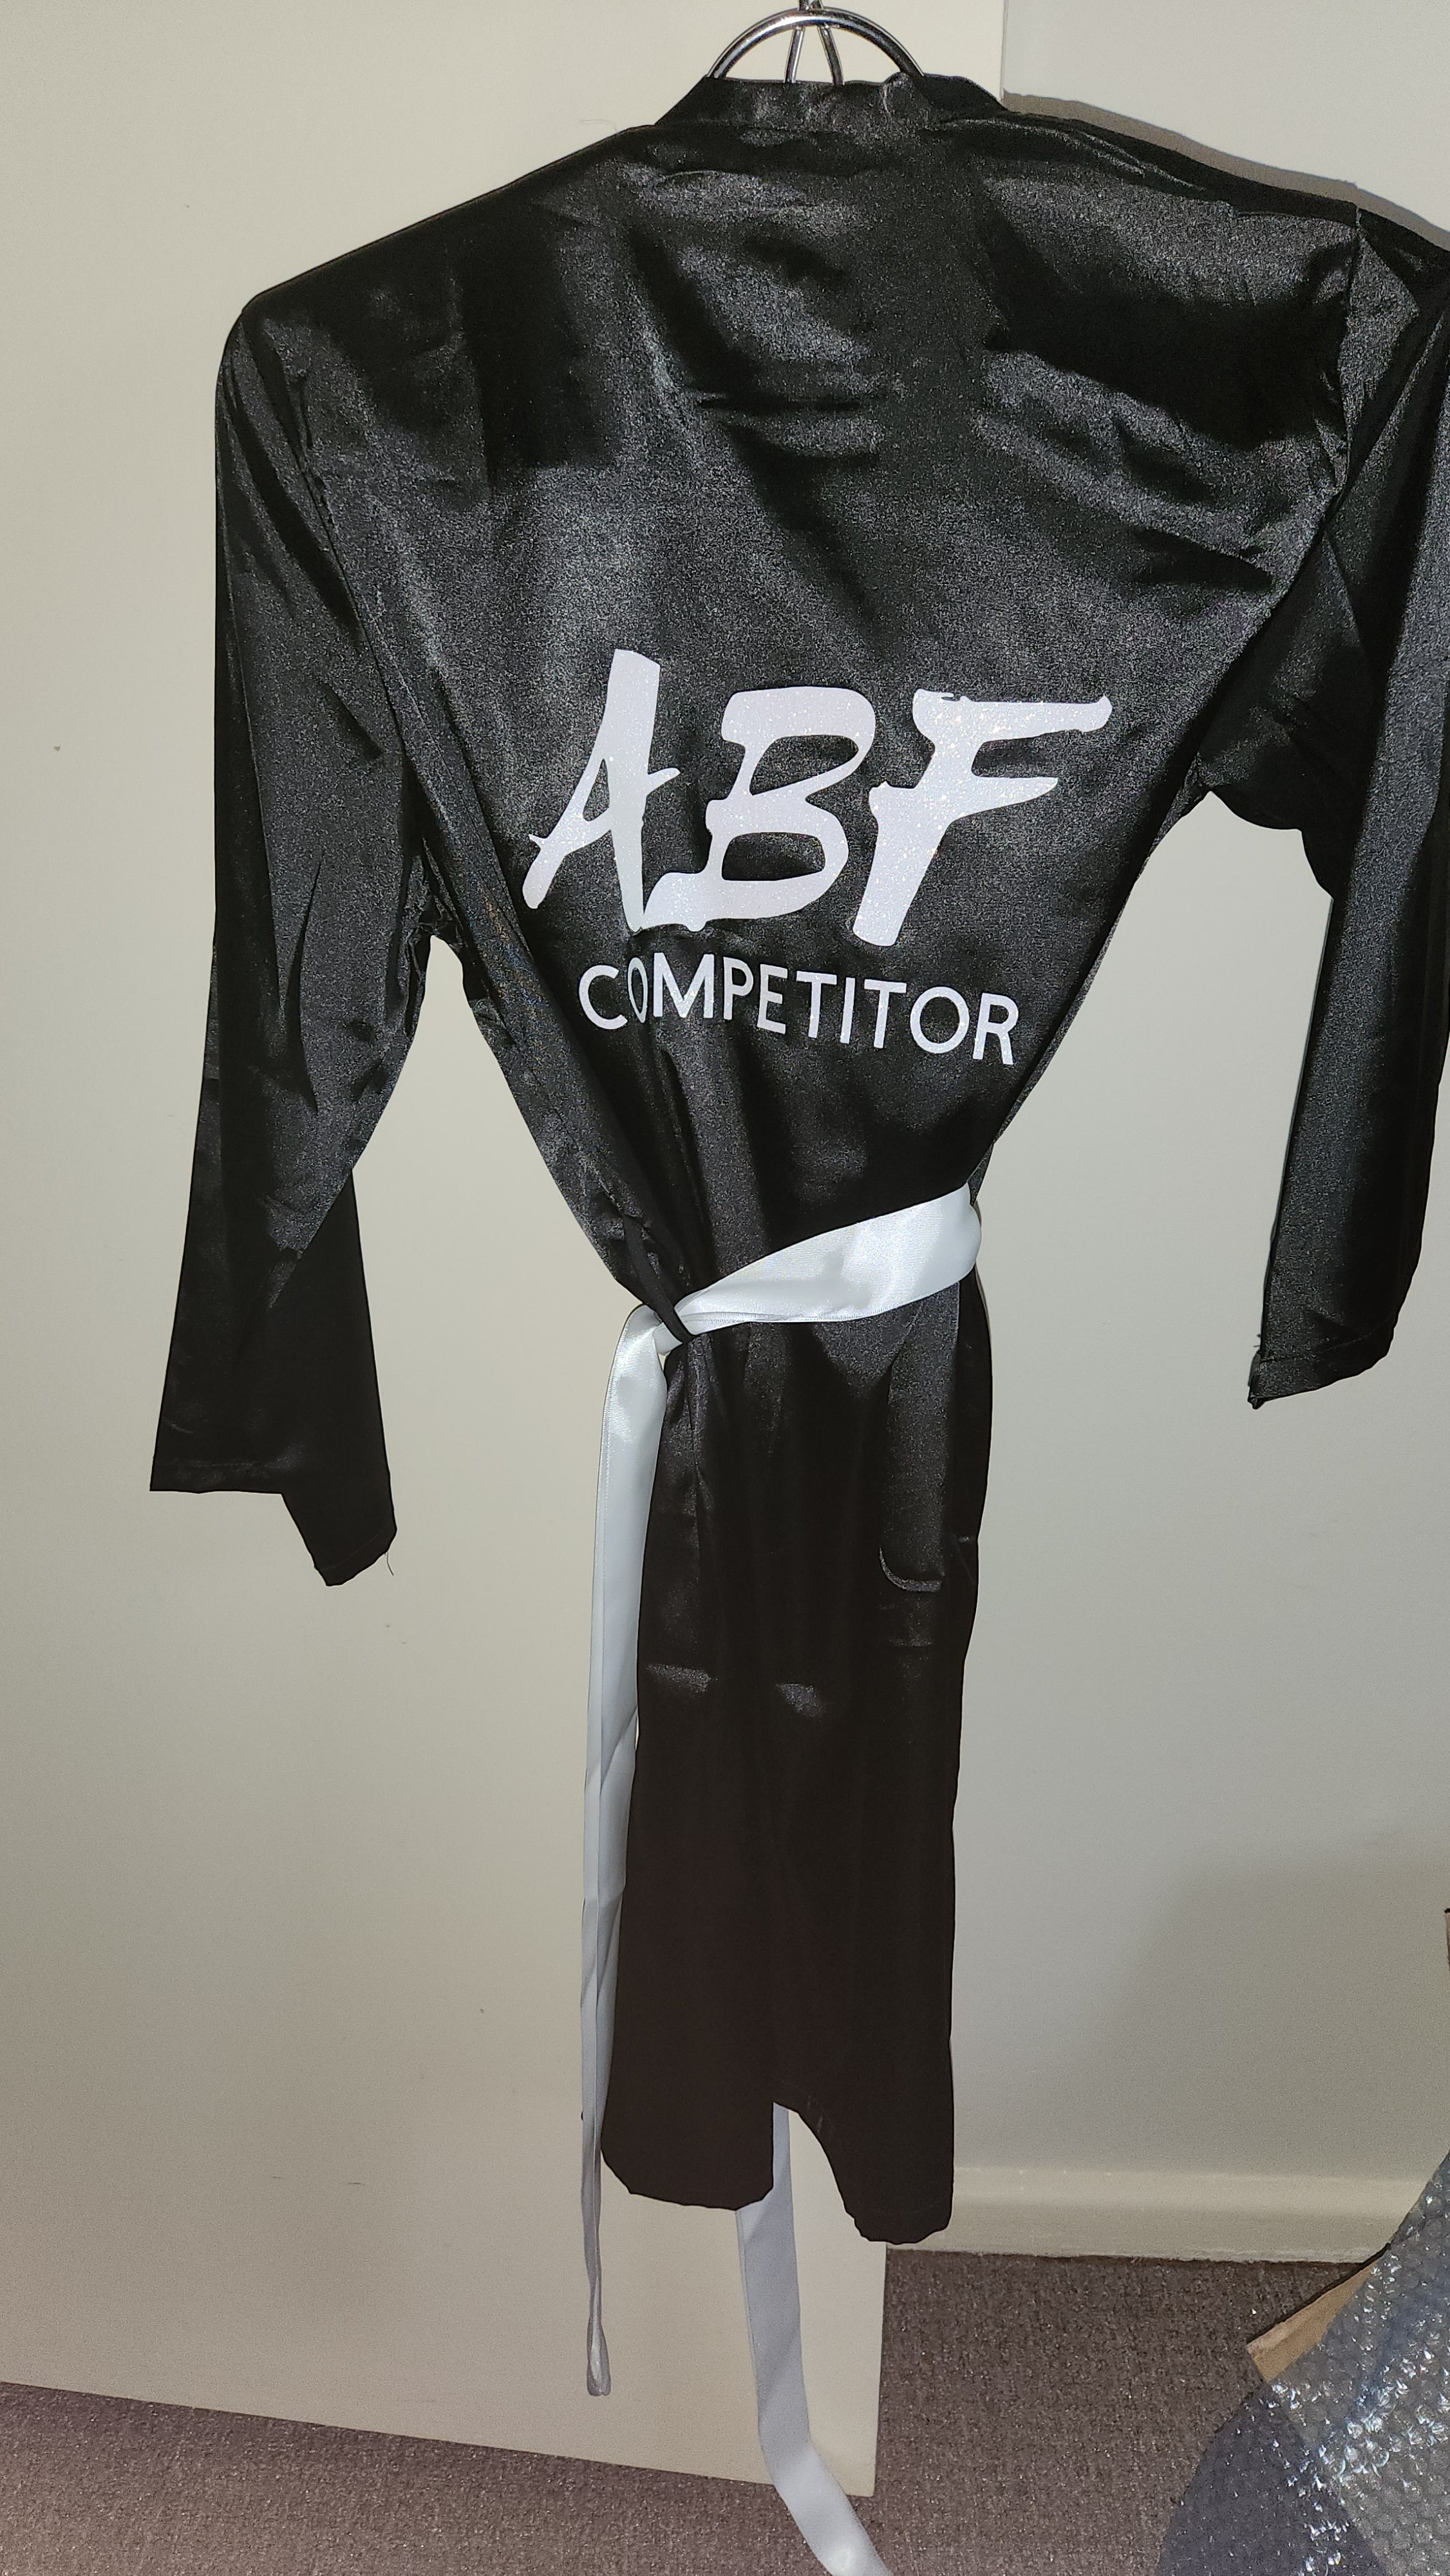 Competition Robe for coaching teams